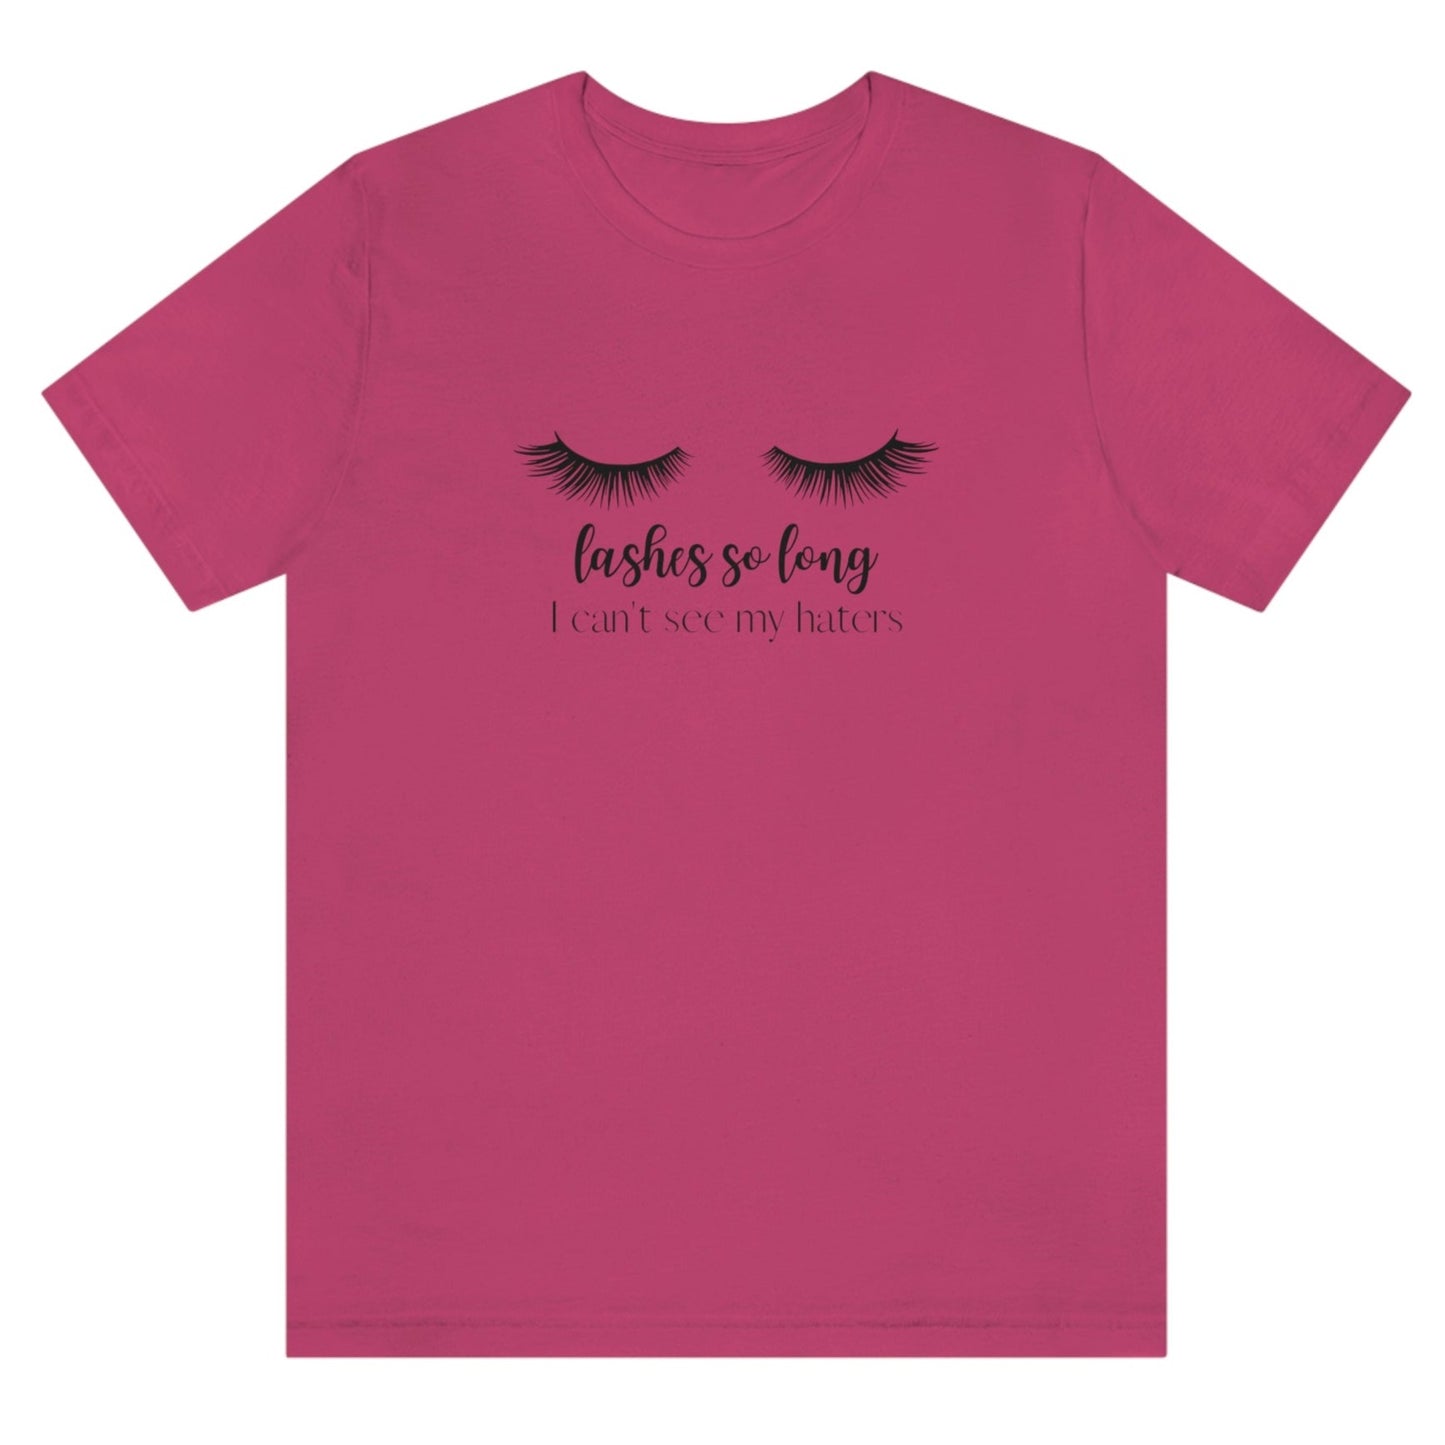    lashes-so-long-i-cant-see-my-haters-berry-t-shirt-womens